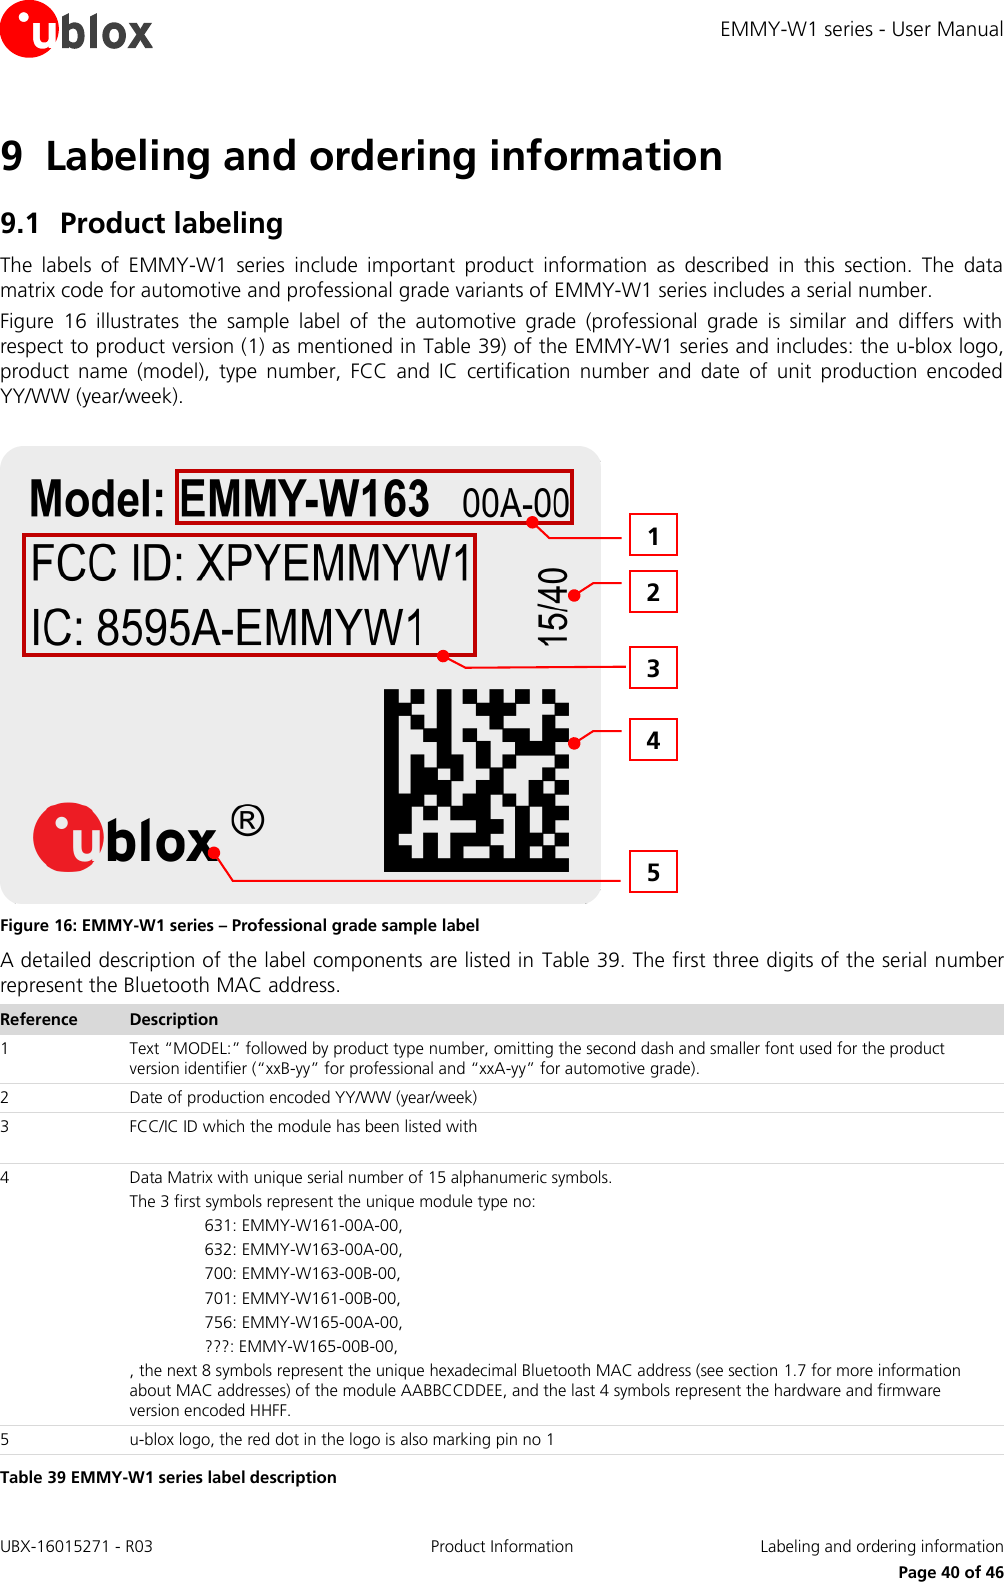 EMMY-W1 series - User Manual UBX-16015271 - R03 Product Information  Labeling and ordering information     Page 40 of 46 9 Labeling and ordering information 9.1 Product labeling The  labels  of  EMMY-W1  series  include  important  product  information  as  described  in  this  section.  The  data matrix code for automotive and professional grade variants of EMMY-W1 series includes a serial number.  Figure  16  illustrates  the  sample  label  of  the  automotive  grade  (professional  grade  is  similar  and  differs  with respect to product version (1) as mentioned in Table 39) of the EMMY-W1 series and includes: the u-blox logo, product  name  (model),  type  number,  FCC  and  IC  certification  number  and  date  of  unit  production  encoded YY/WW (year/week).   Figure 16: EMMY-W1 series – Professional grade sample label A detailed description of the label components are listed in  Table 39. The first three digits of the serial number represent the Bluetooth MAC address.  Reference Description 1 Text “MODEL:” followed by product type number, omitting the second dash and smaller font used for the product version identifier (“xxB-yy” for professional and “xxA-yy” for automotive grade). 2 Date of production encoded YY/WW (year/week) 3 FCC/IC ID which the module has been listed with 4 Data Matrix with unique serial number of 15 alphanumeric symbols. The 3 first symbols represent the unique module type no: 631: EMMY-W161-00A-00, 632: EMMY-W163-00A-00, 700: EMMY-W163-00B-00, 701: EMMY-W161-00B-00, 756: EMMY-W165-00A-00, ???: EMMY-W165-00B-00, , the next 8 symbols represent the unique hexadecimal Bluetooth MAC address (see section 1.7 for more information about MAC addresses) of the module AABBCCDDEE, and the last 4 symbols represent the hardware and firmware version encoded HHFF. 5 u-blox logo, the red dot in the logo is also marking pin no 1 Table 39 EMMY-W1 series label description 5 3 4 2 1 